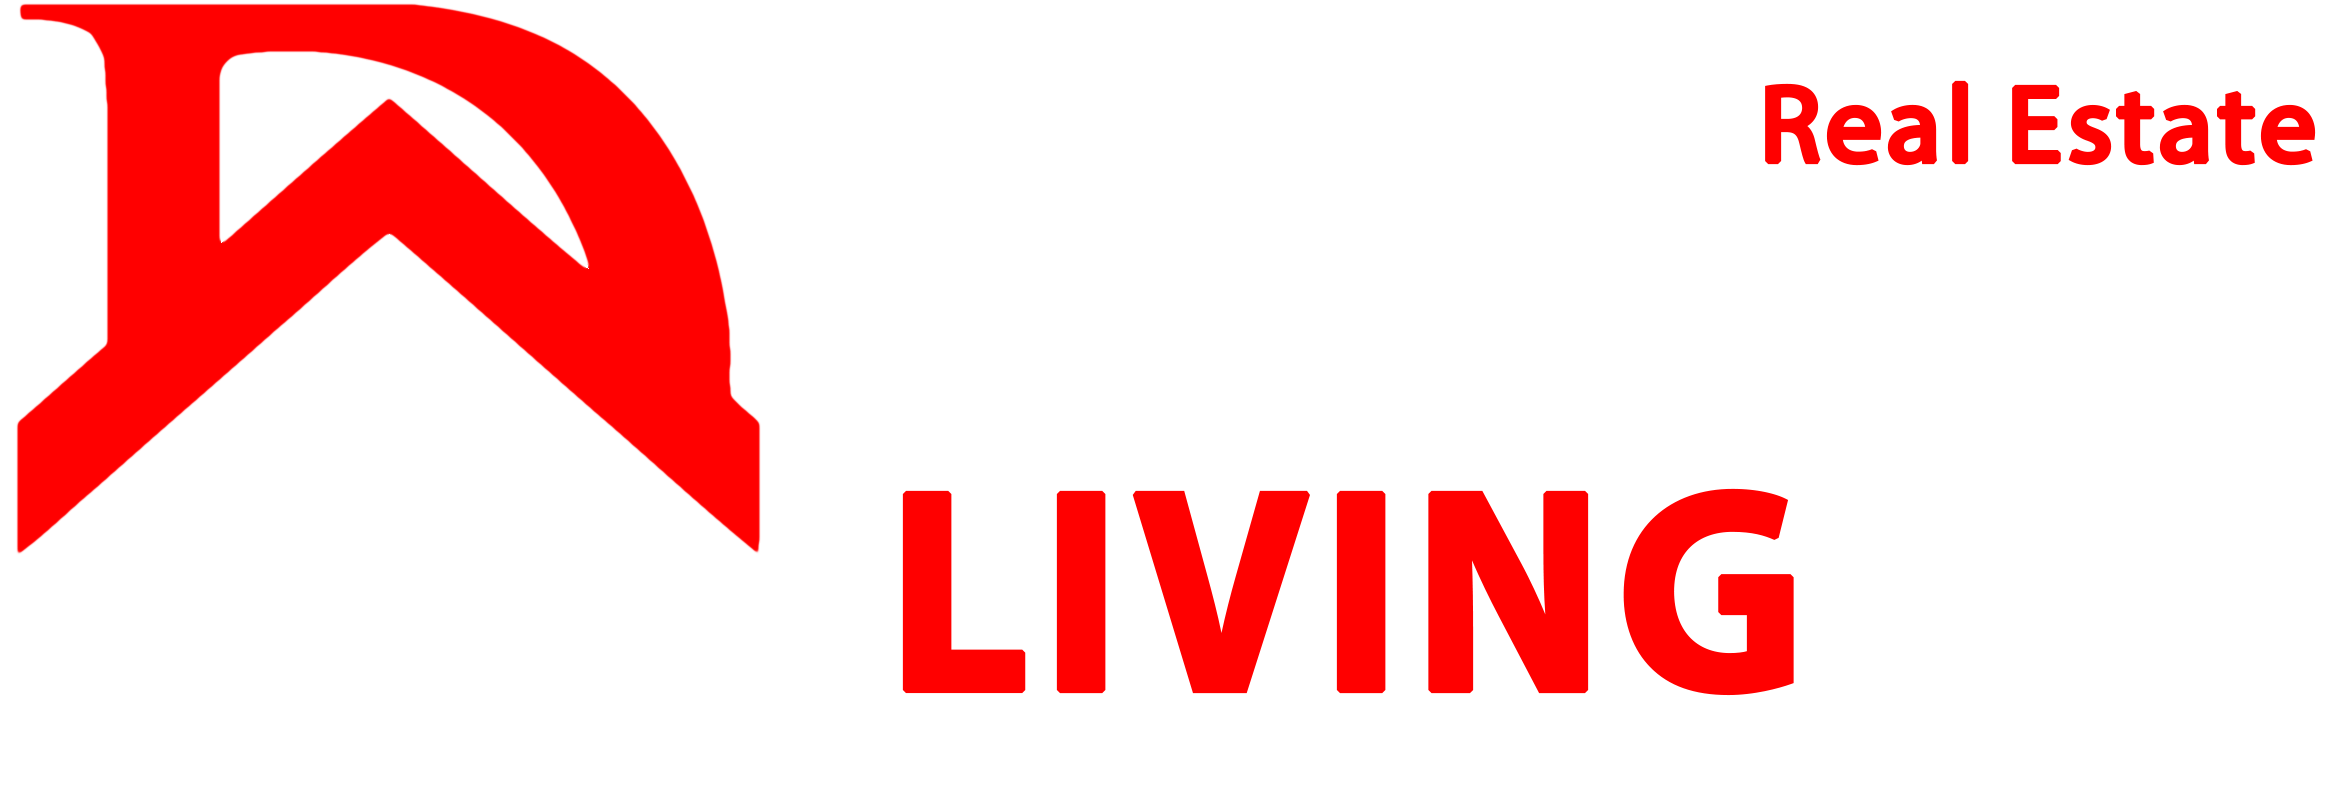 Designed Living Investments